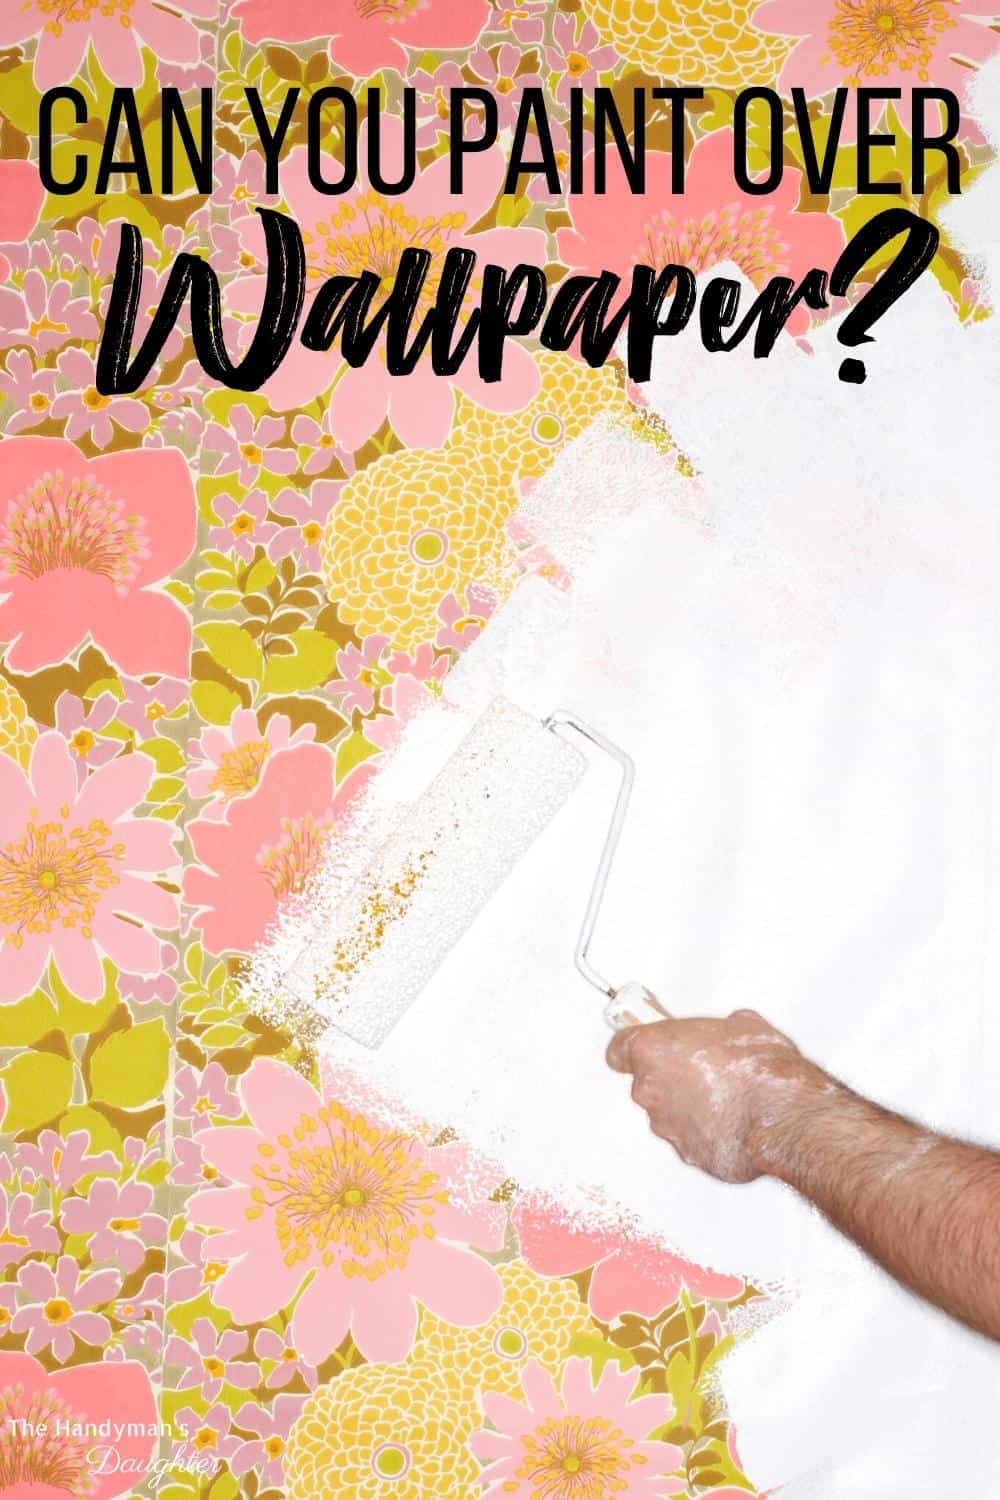 Can you paint over wallpaper?